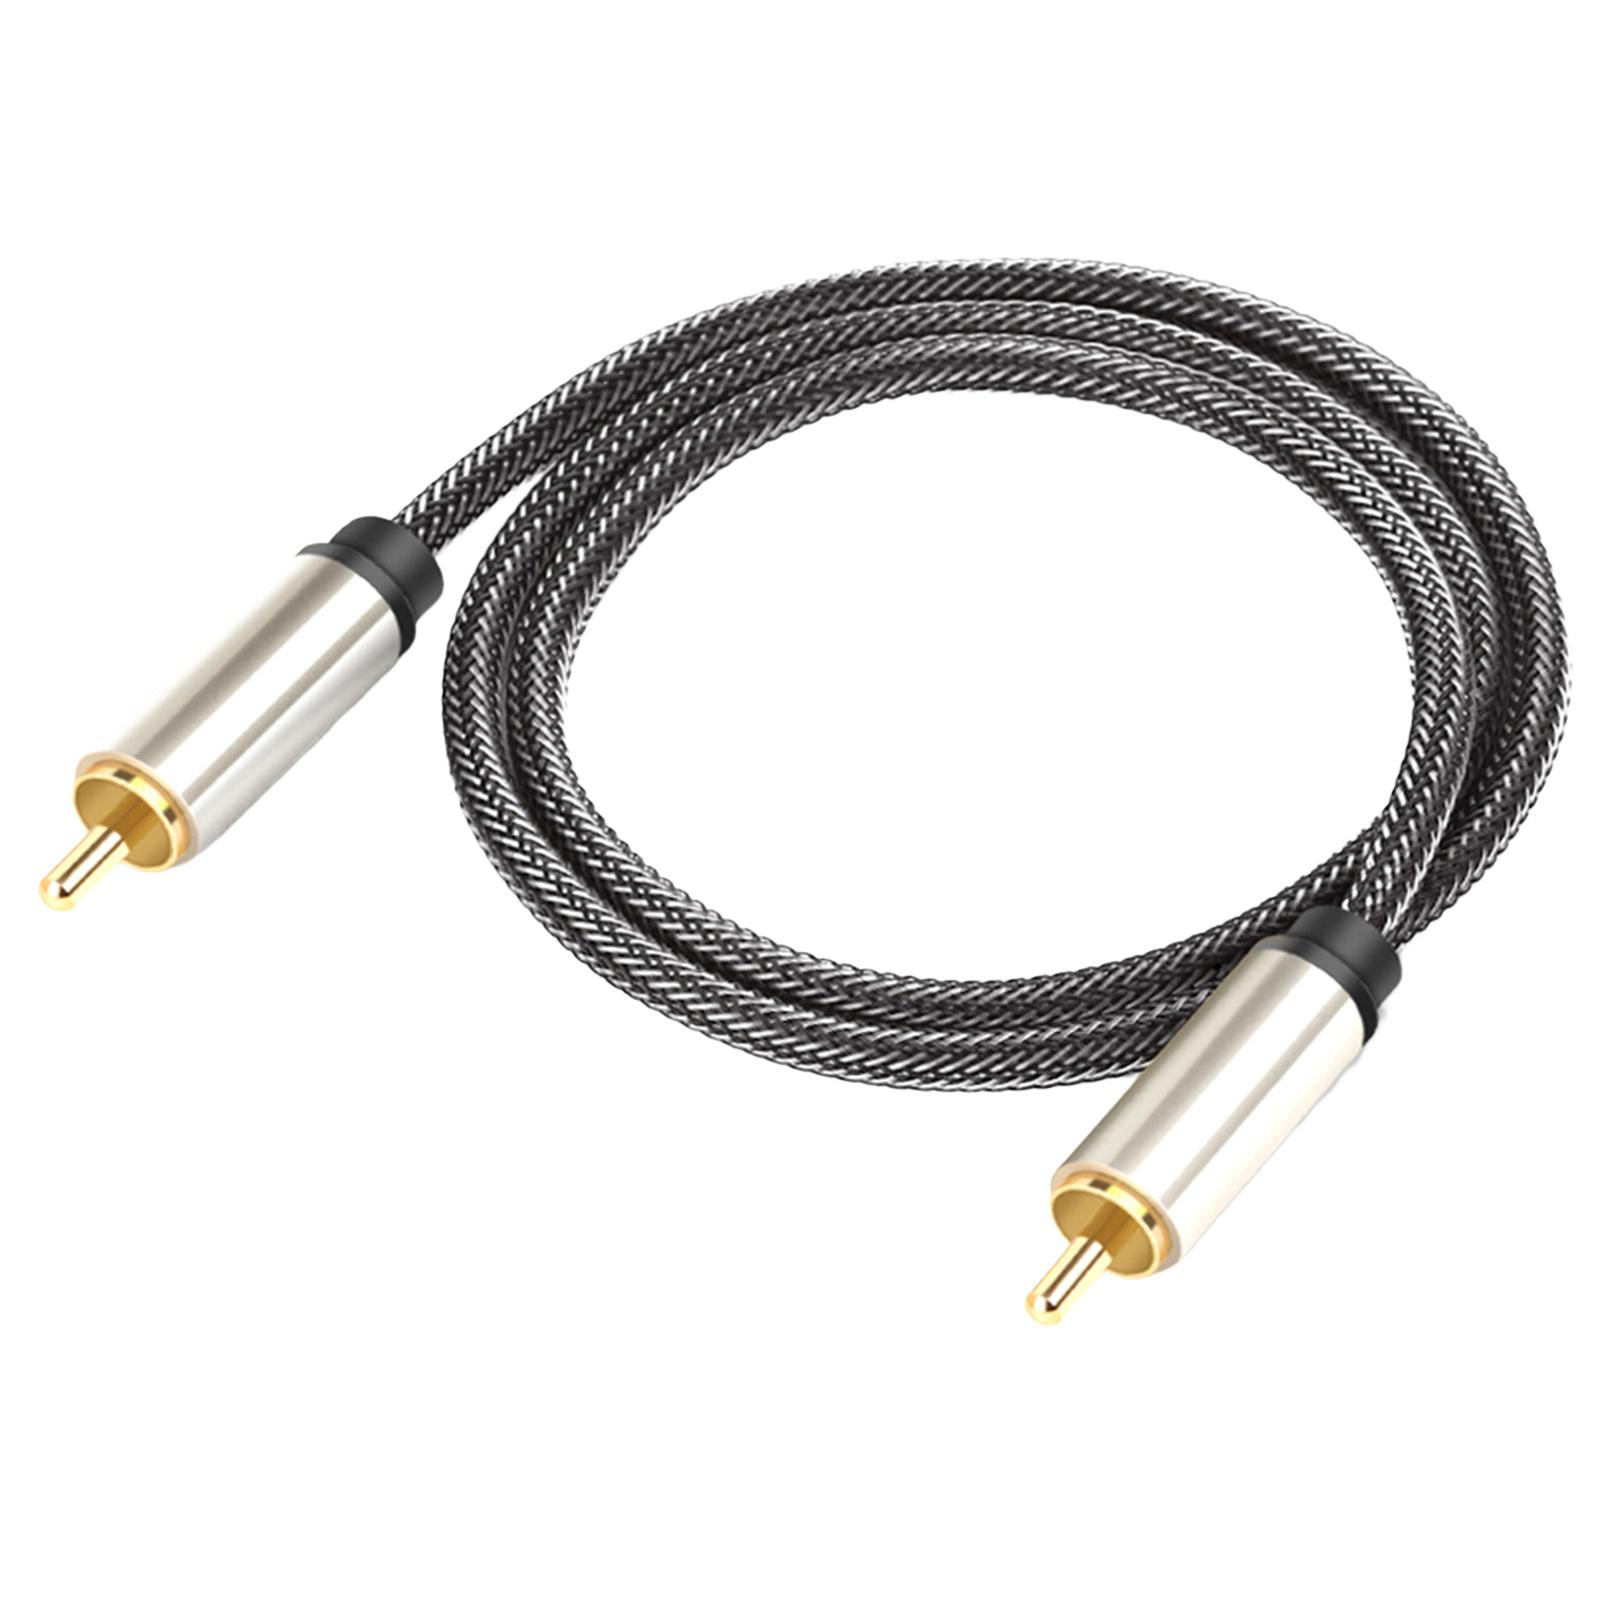 Coaxial Digital Audio Cable/ 1 Male to 1 Male RCA Stereo Cable HiFi 5.1 SPDIF Connector/ for Soundbar Home Theater HDTV Speaker , 1.5m - image 1 of 3